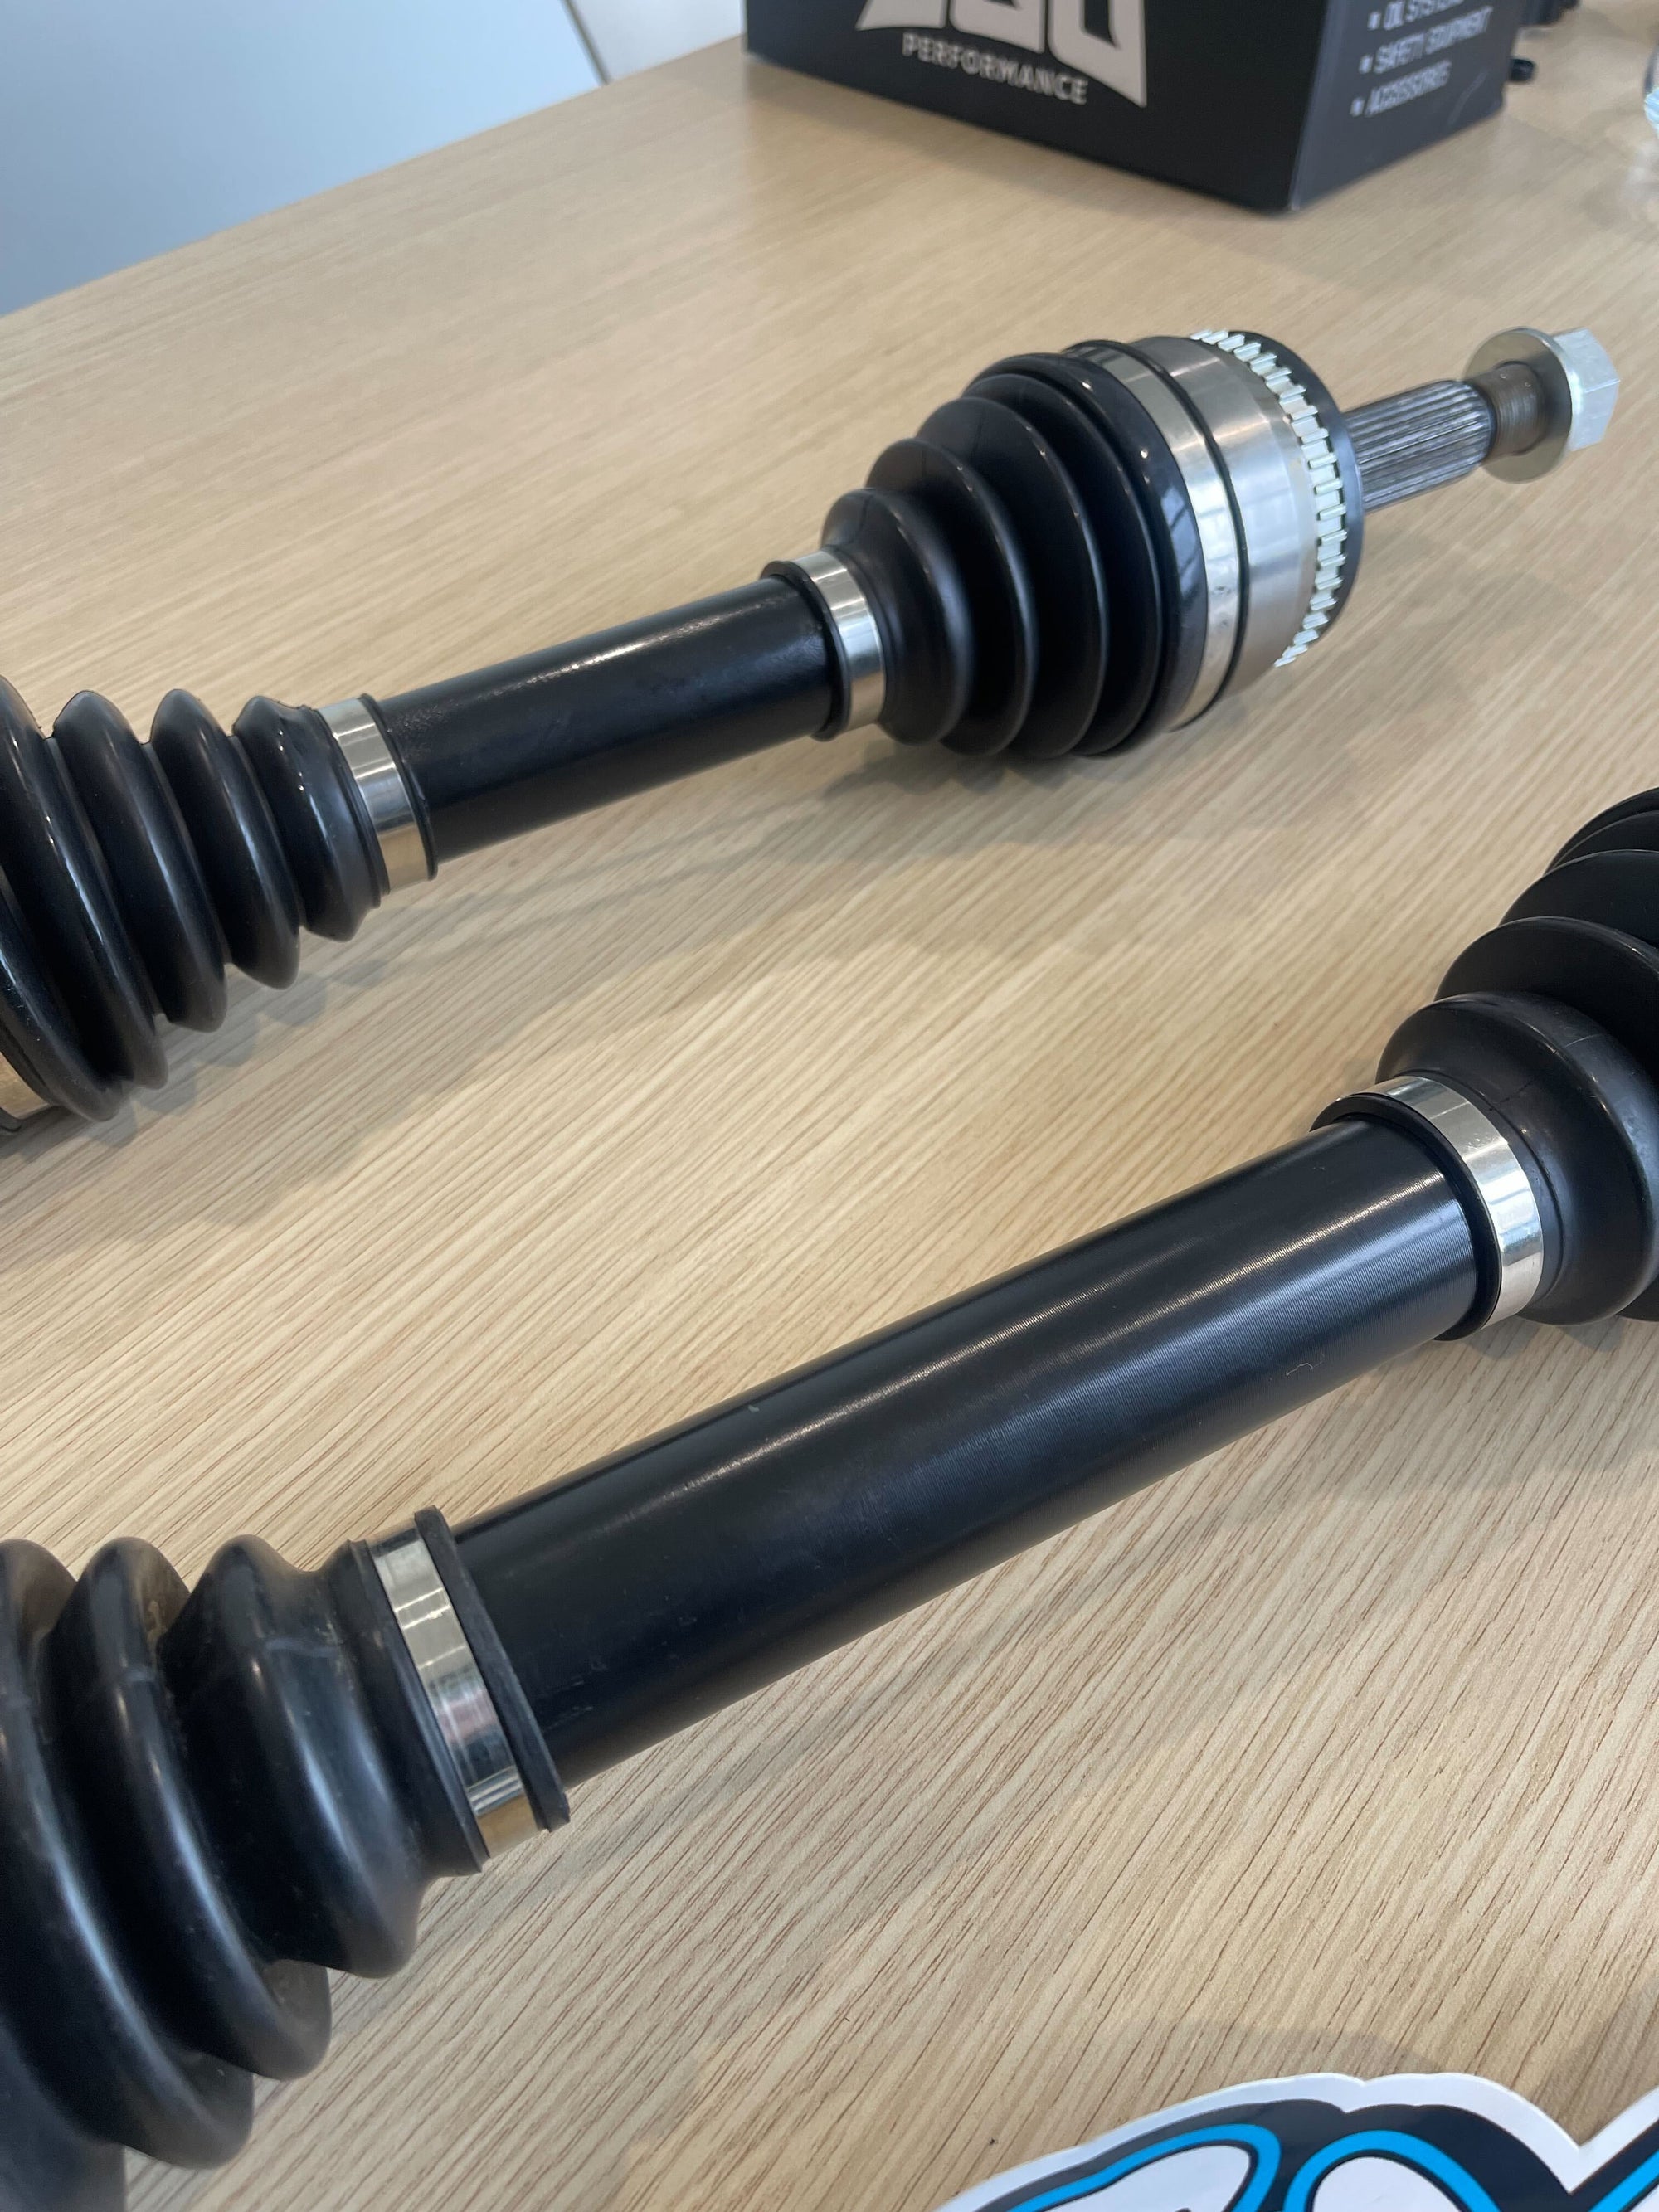 Custom Performance Axles -  Made to your specs!